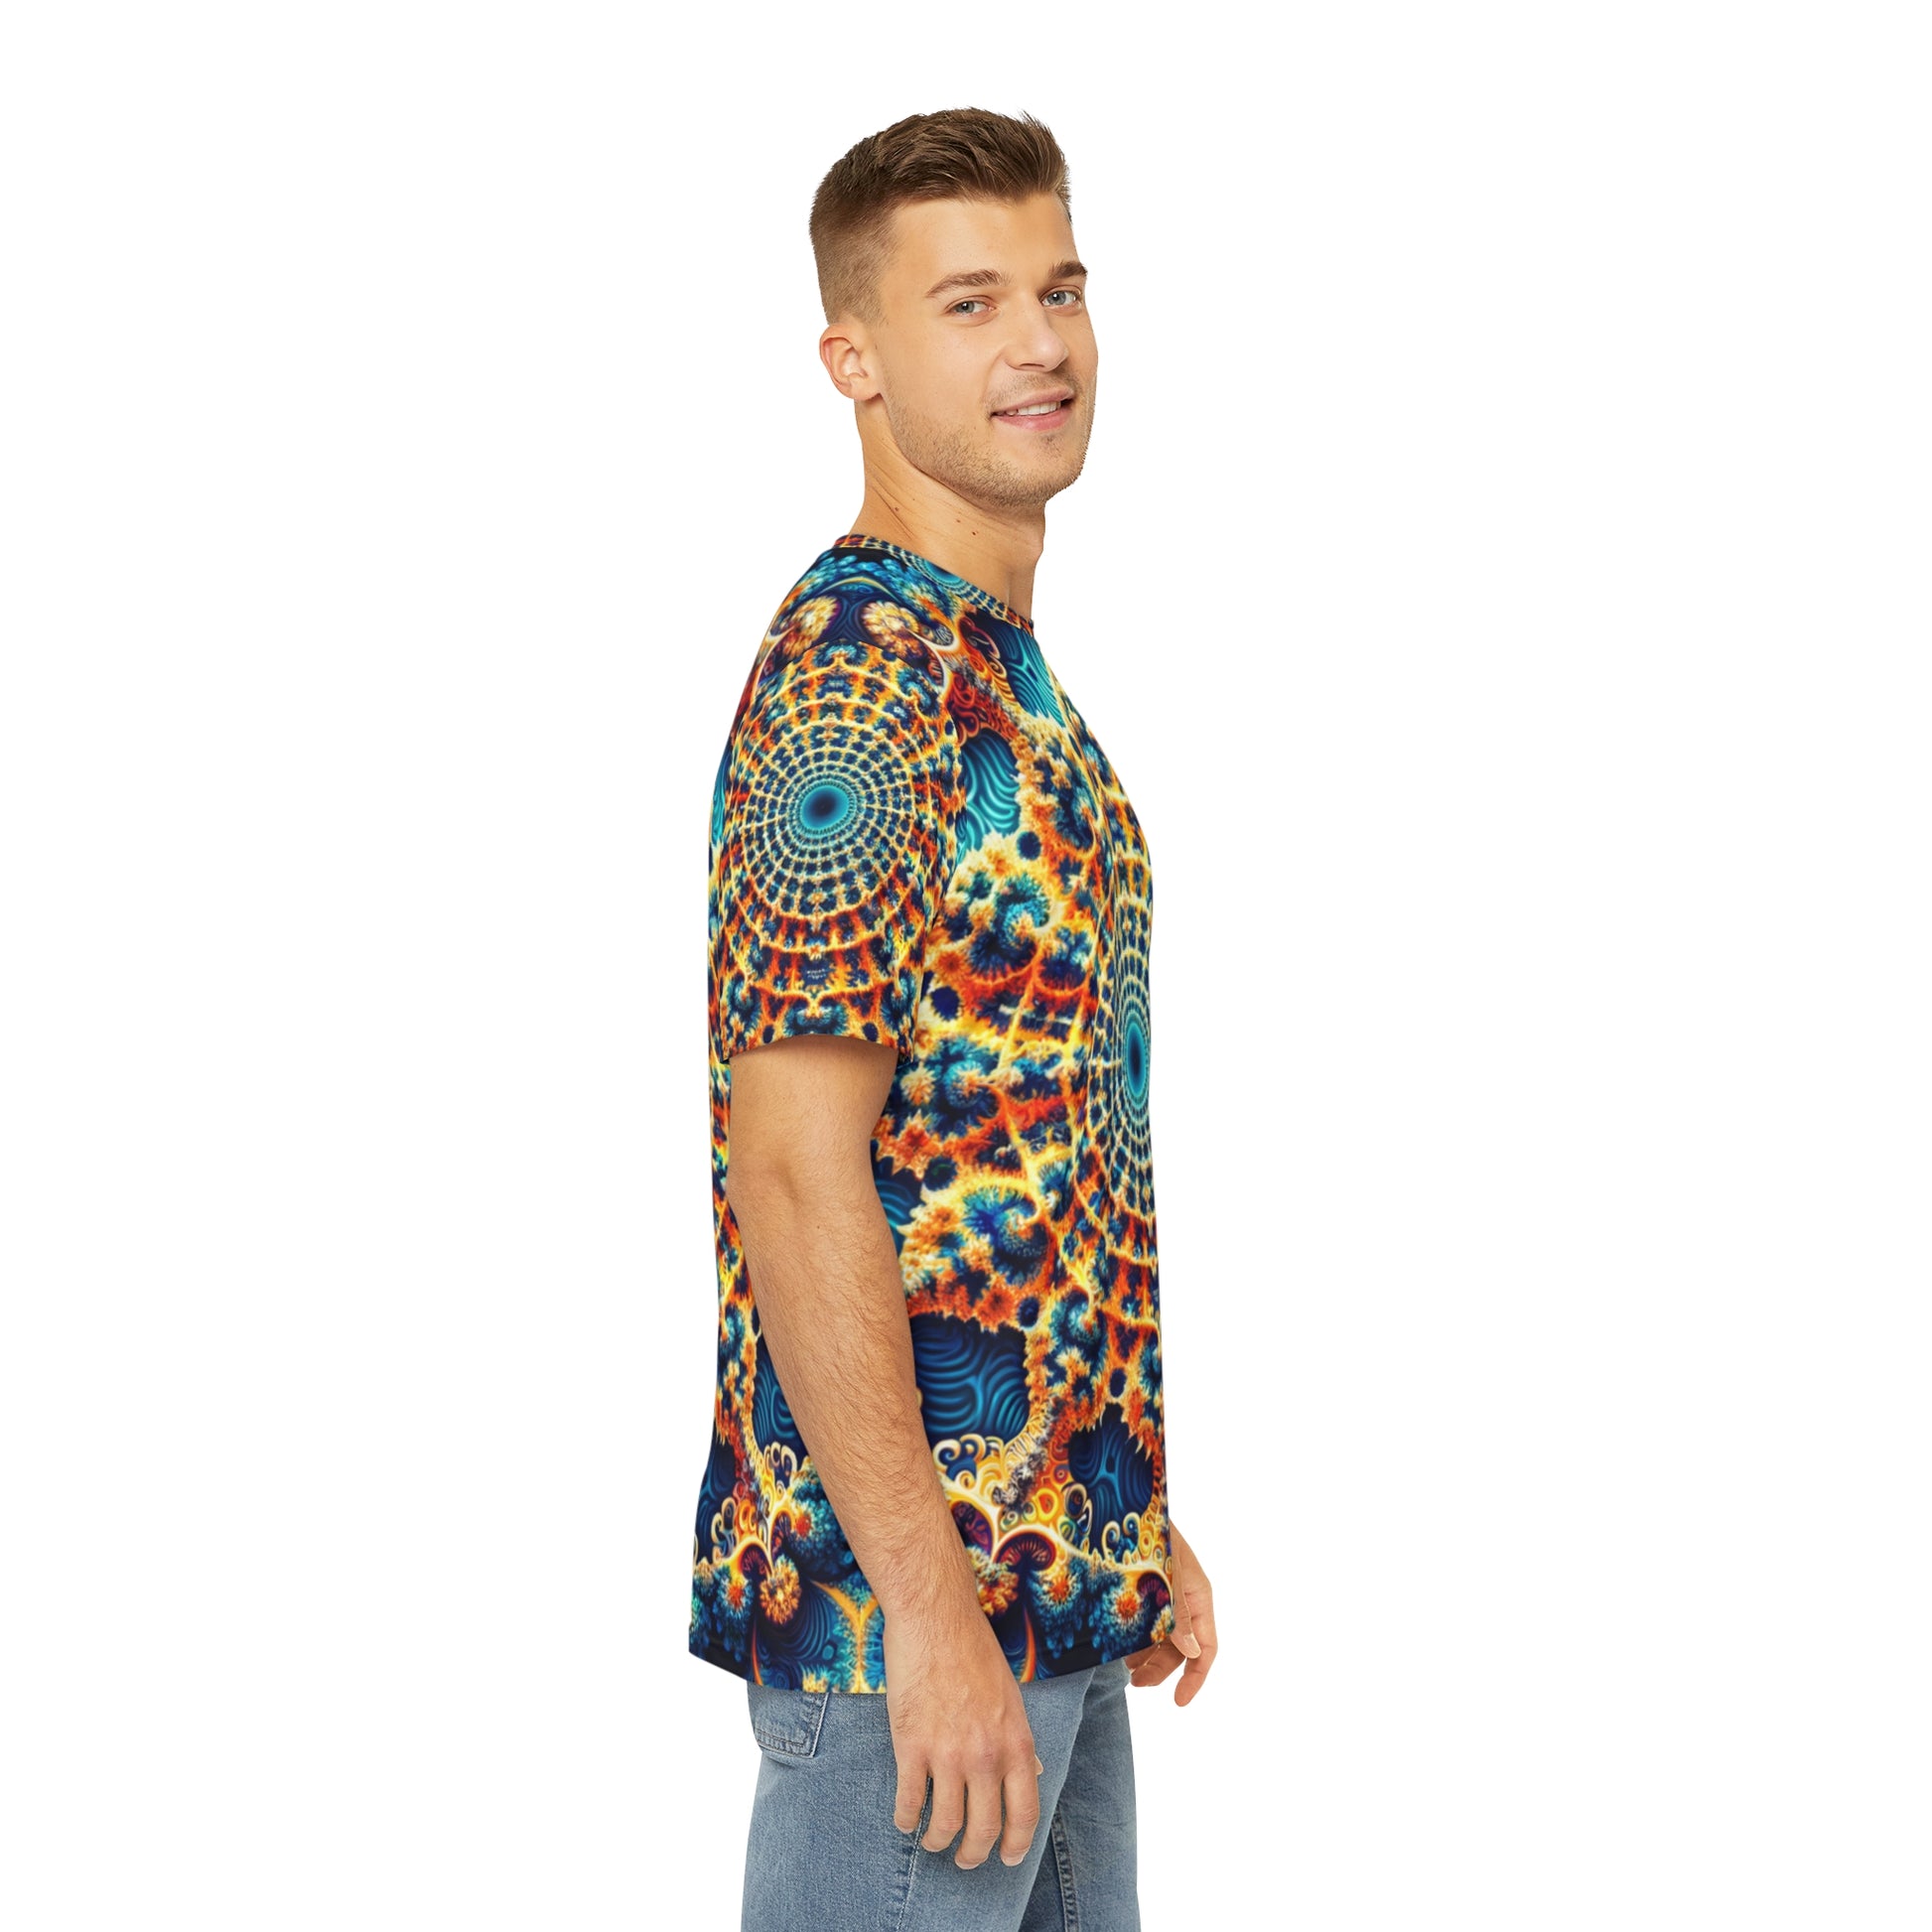 Side view of the Azurite Mandala Bloom Crewneck Pullover All-Over Print Short-Sleeved Shirt blue yellow red white mandala pattern paired with casual denim pants worn by a white man